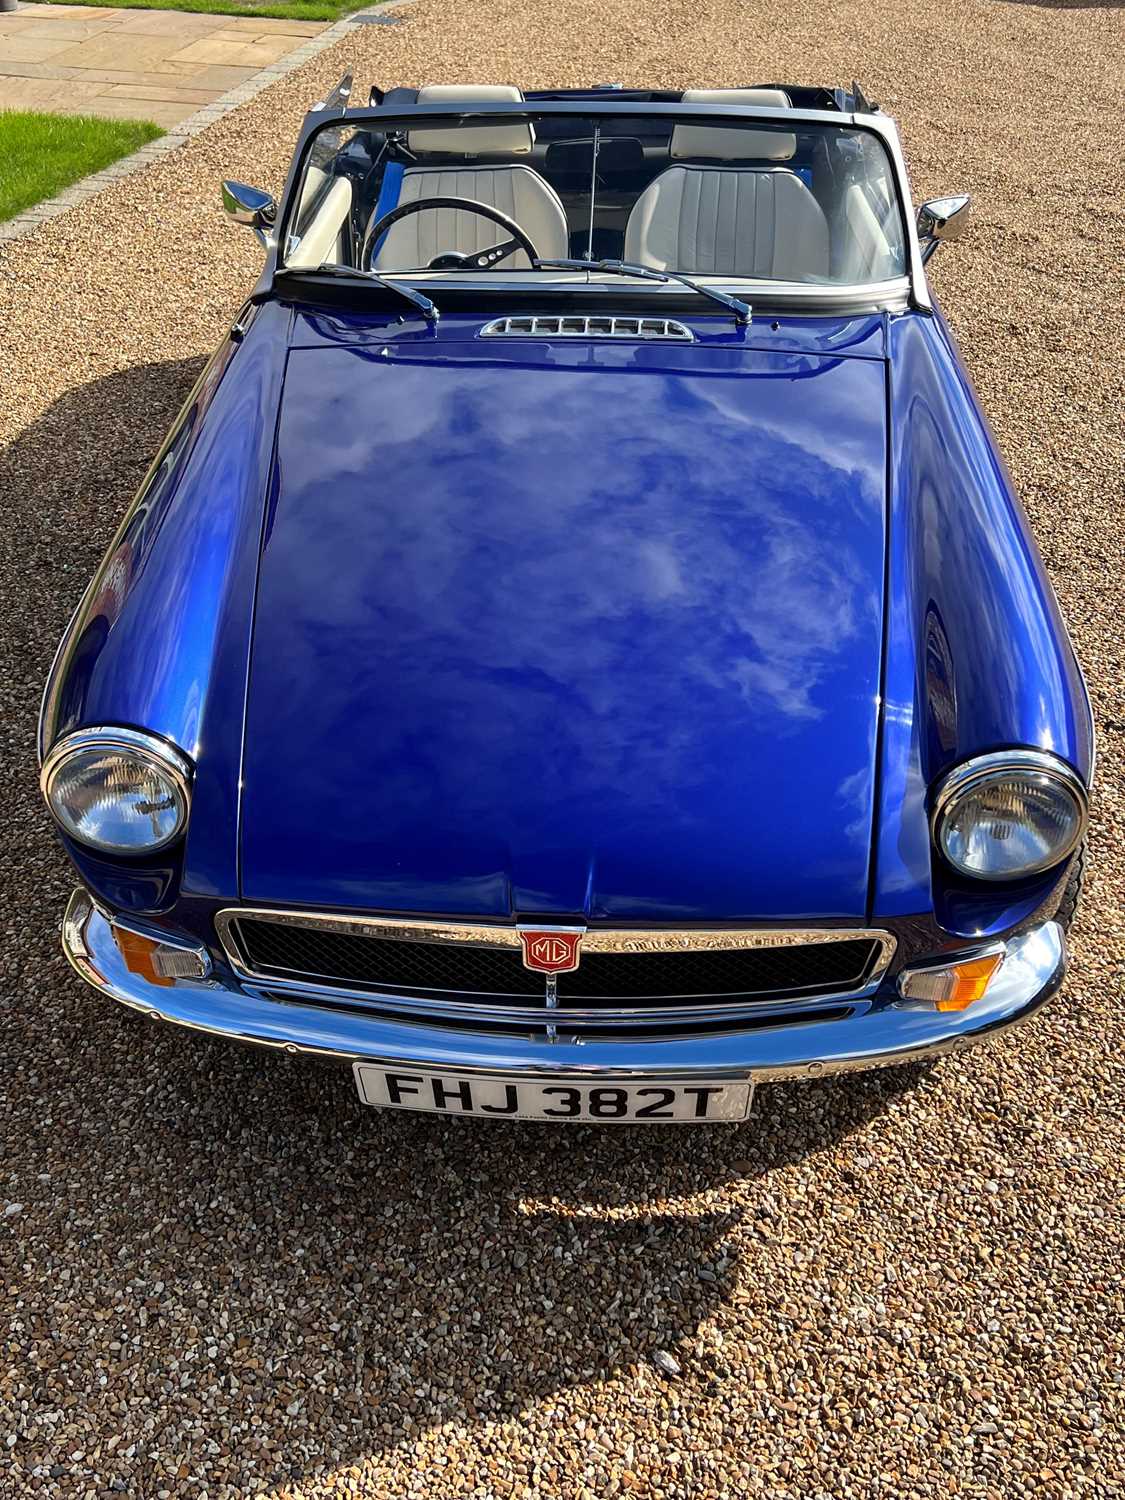 A 1979 MGB Roadster - Image 3 of 14